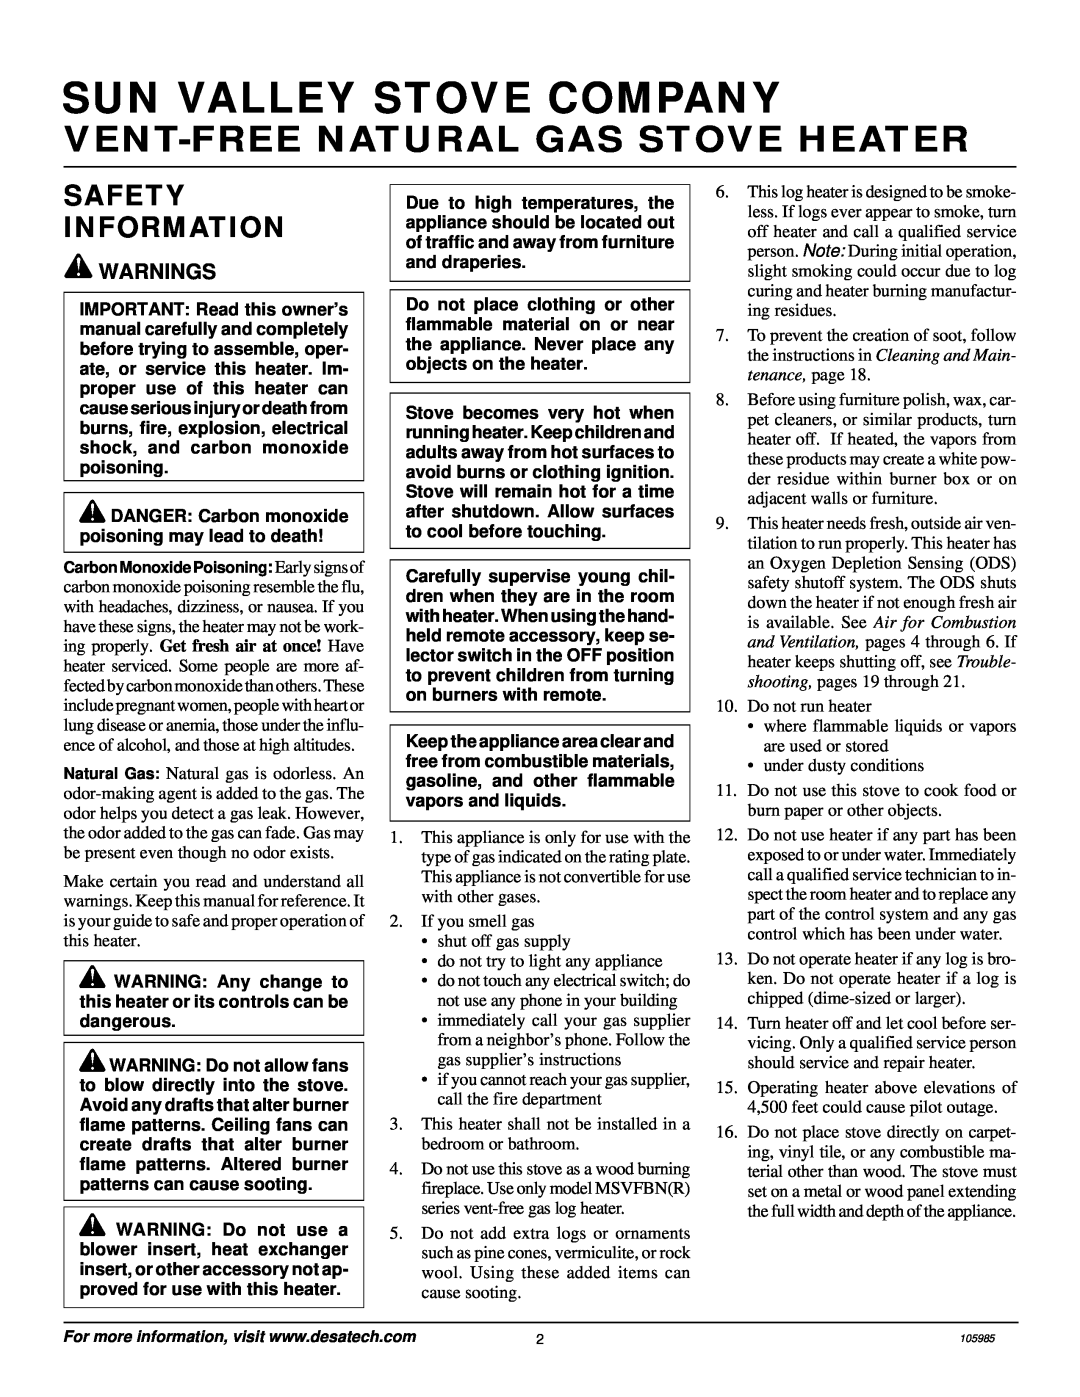 Desa MSVFBNR Series Sun Valley Stove Company, Safety Information, Warnings, Vent-Freenatural Gas Stove Heater 